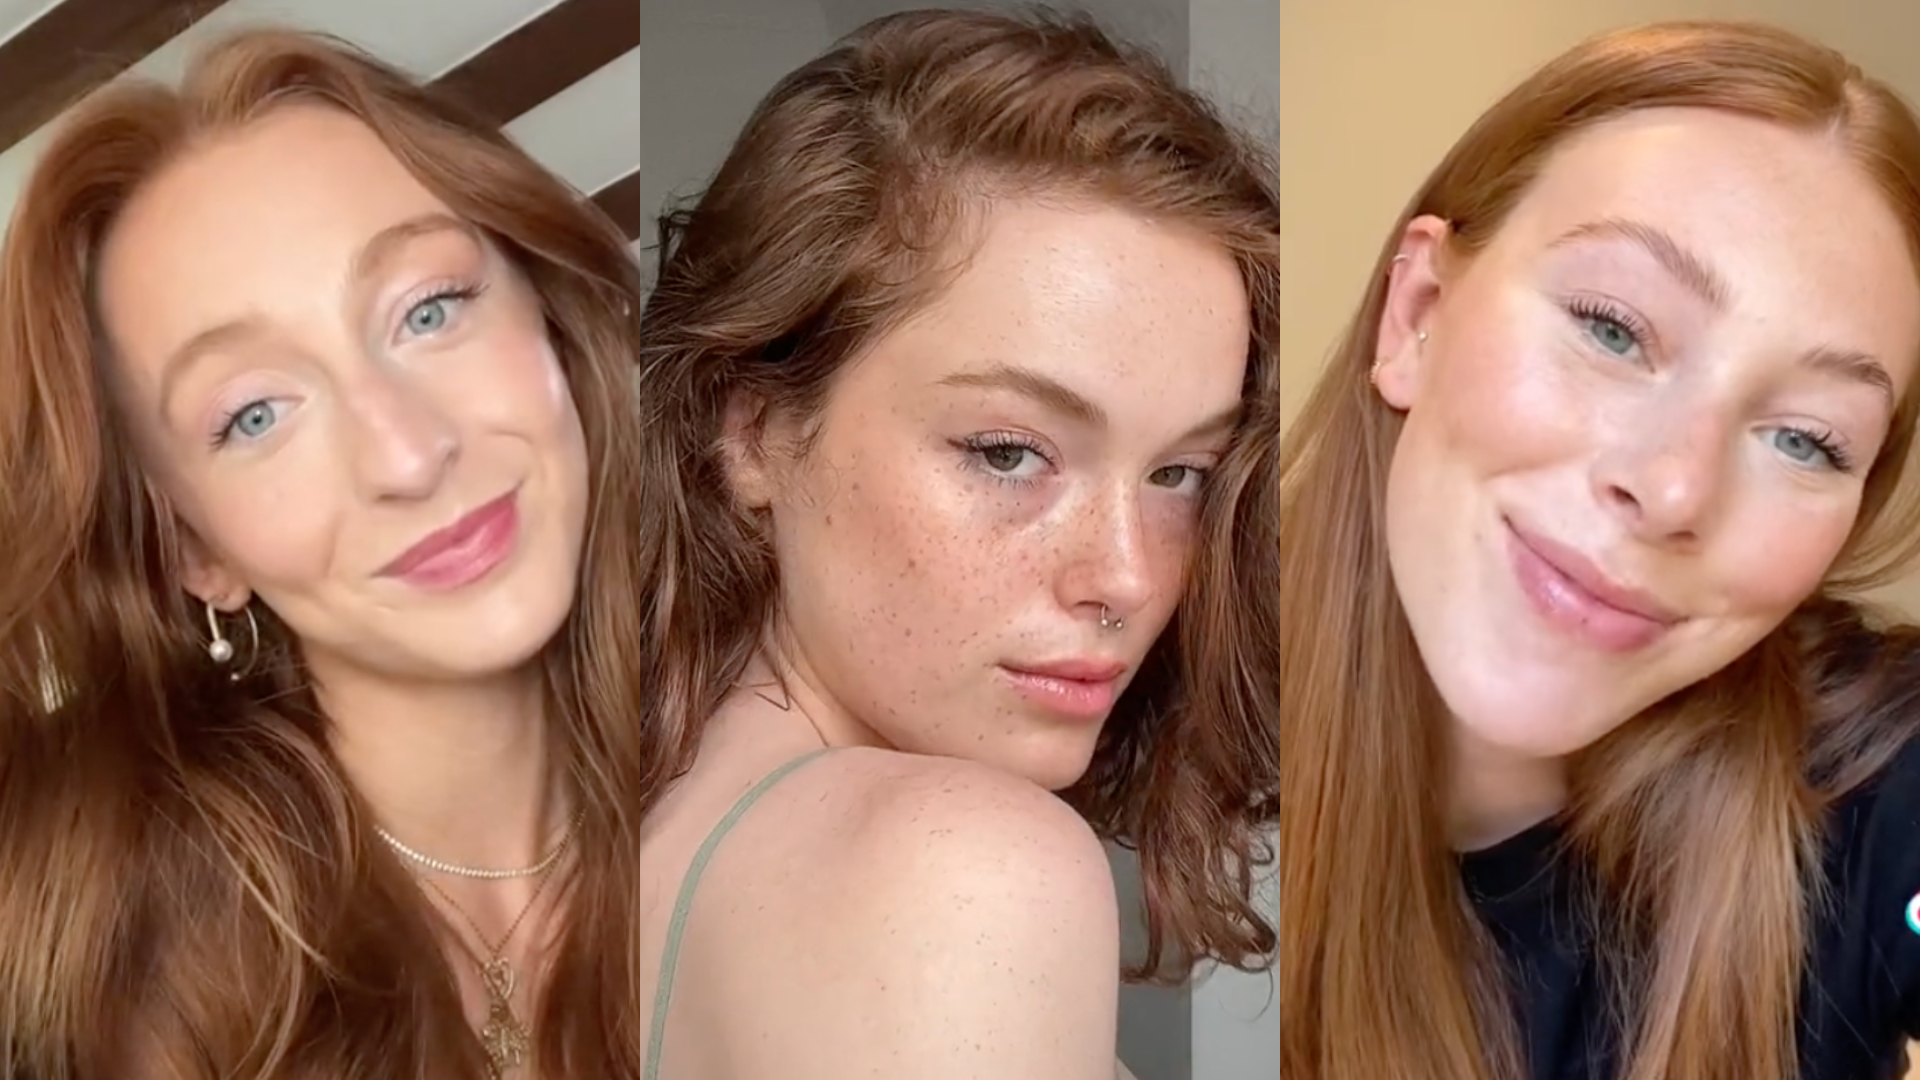 5 TikTokers Share Their Summer Redhead Makeup Routines